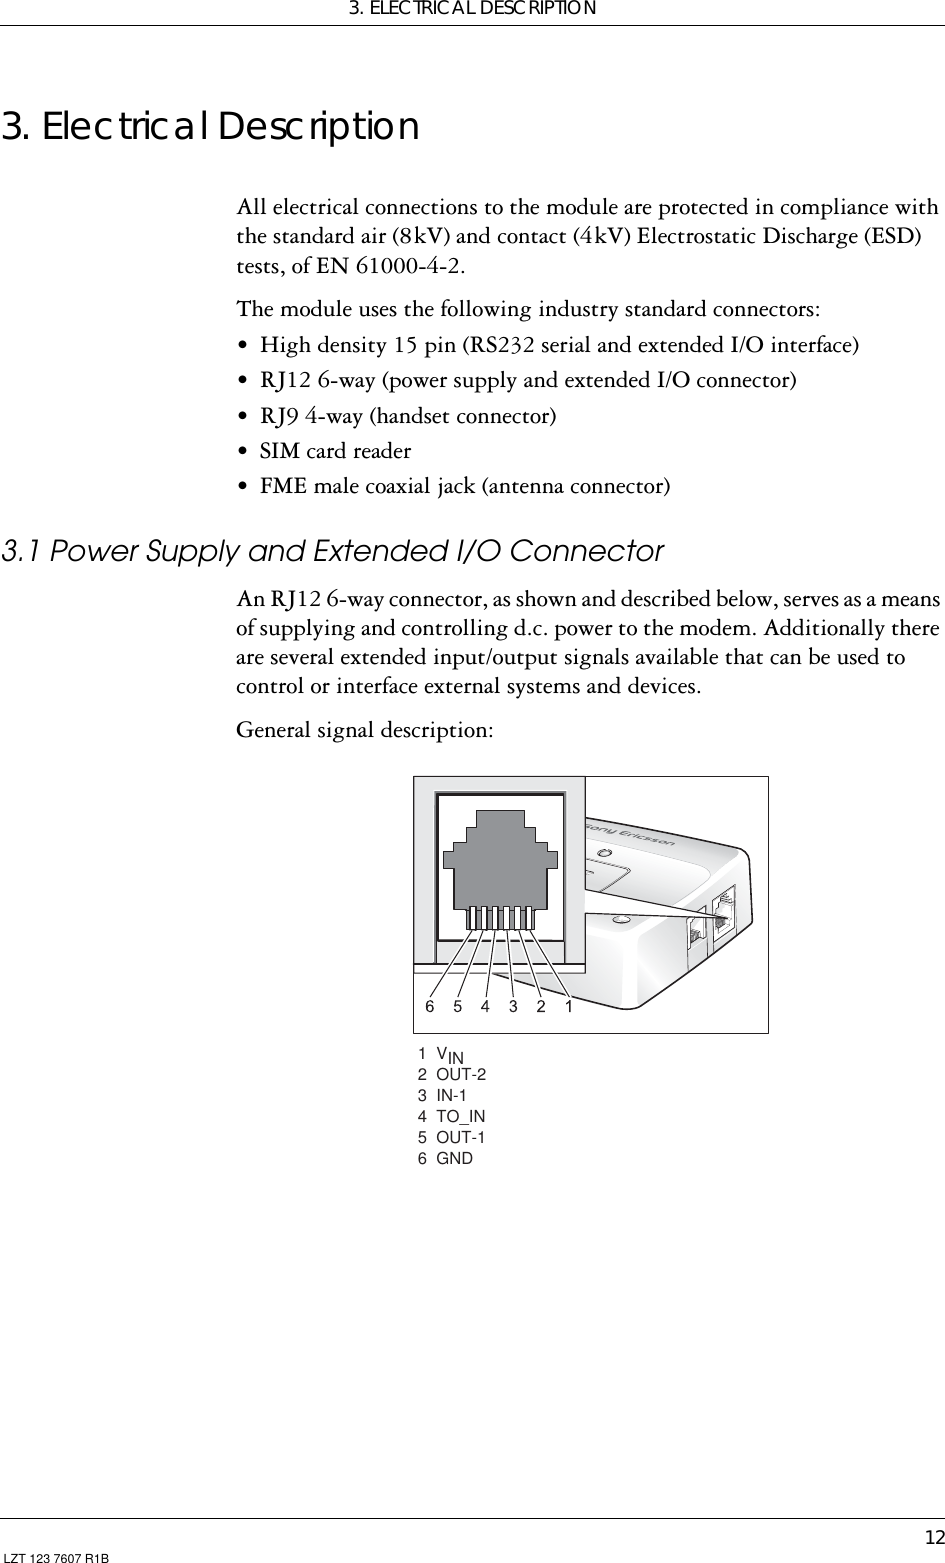 3. ELECTRICAL DESCRIPTION12 LZT 123 7607 R1B3. Electrical DescriptionAll electrical connections to the module are protected in compliance with the standard air (8 kV) and contact (4 kV) Electrostatic Discharge (ESD) tests, of EN 61000-4-2.The module uses the following industry standard connectors:• High density 15 pin (RS232 serial and extended I/O interface)• RJ12 6-way (power supply and extended I/O connector)• RJ9 4-way (handset connector)• SIM card reader• FME male coaxial jack (antenna connector)3.1 Power Supply and Extended I/O ConnectorAn RJ12 6-way connector, as shown and described below, serves as a means of supplying and controlling d.c. power to the modem. Additionally there are several extended input/output signals available that can be used to control or interface external systems and devices.General signal description: 1  VIN2  OUT-2  3  IN-1    4  TO_IN   5  OUT-1  6  GND